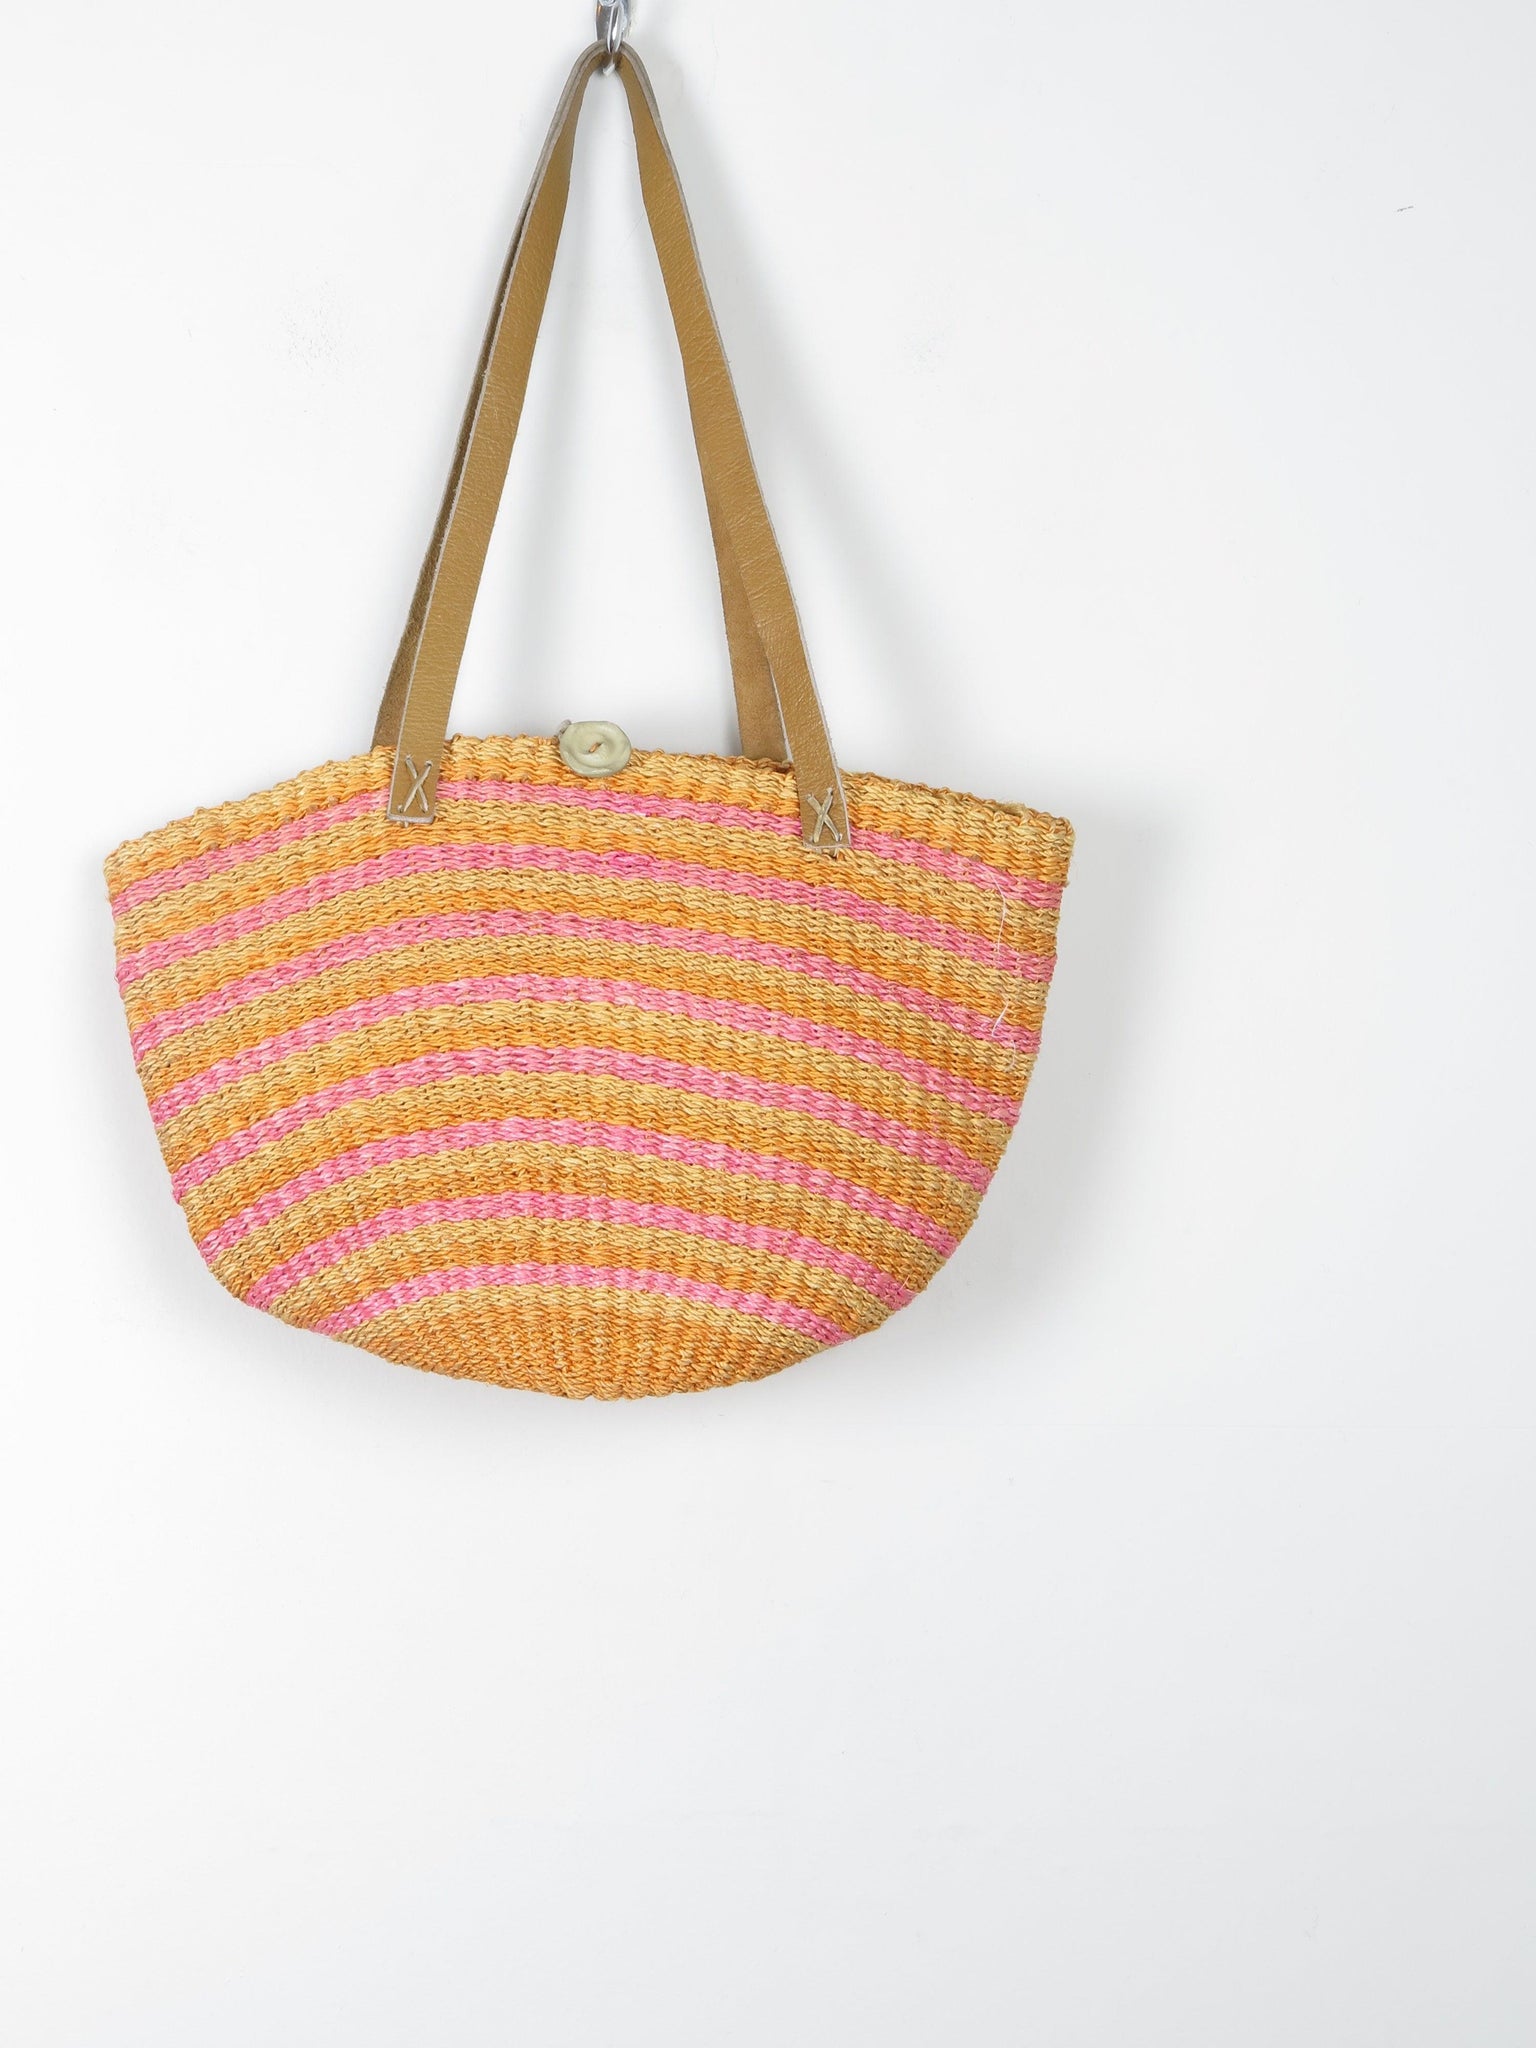 1970s Straw Bag Large Yellow & Pink With Leather Strap - The Harlequin